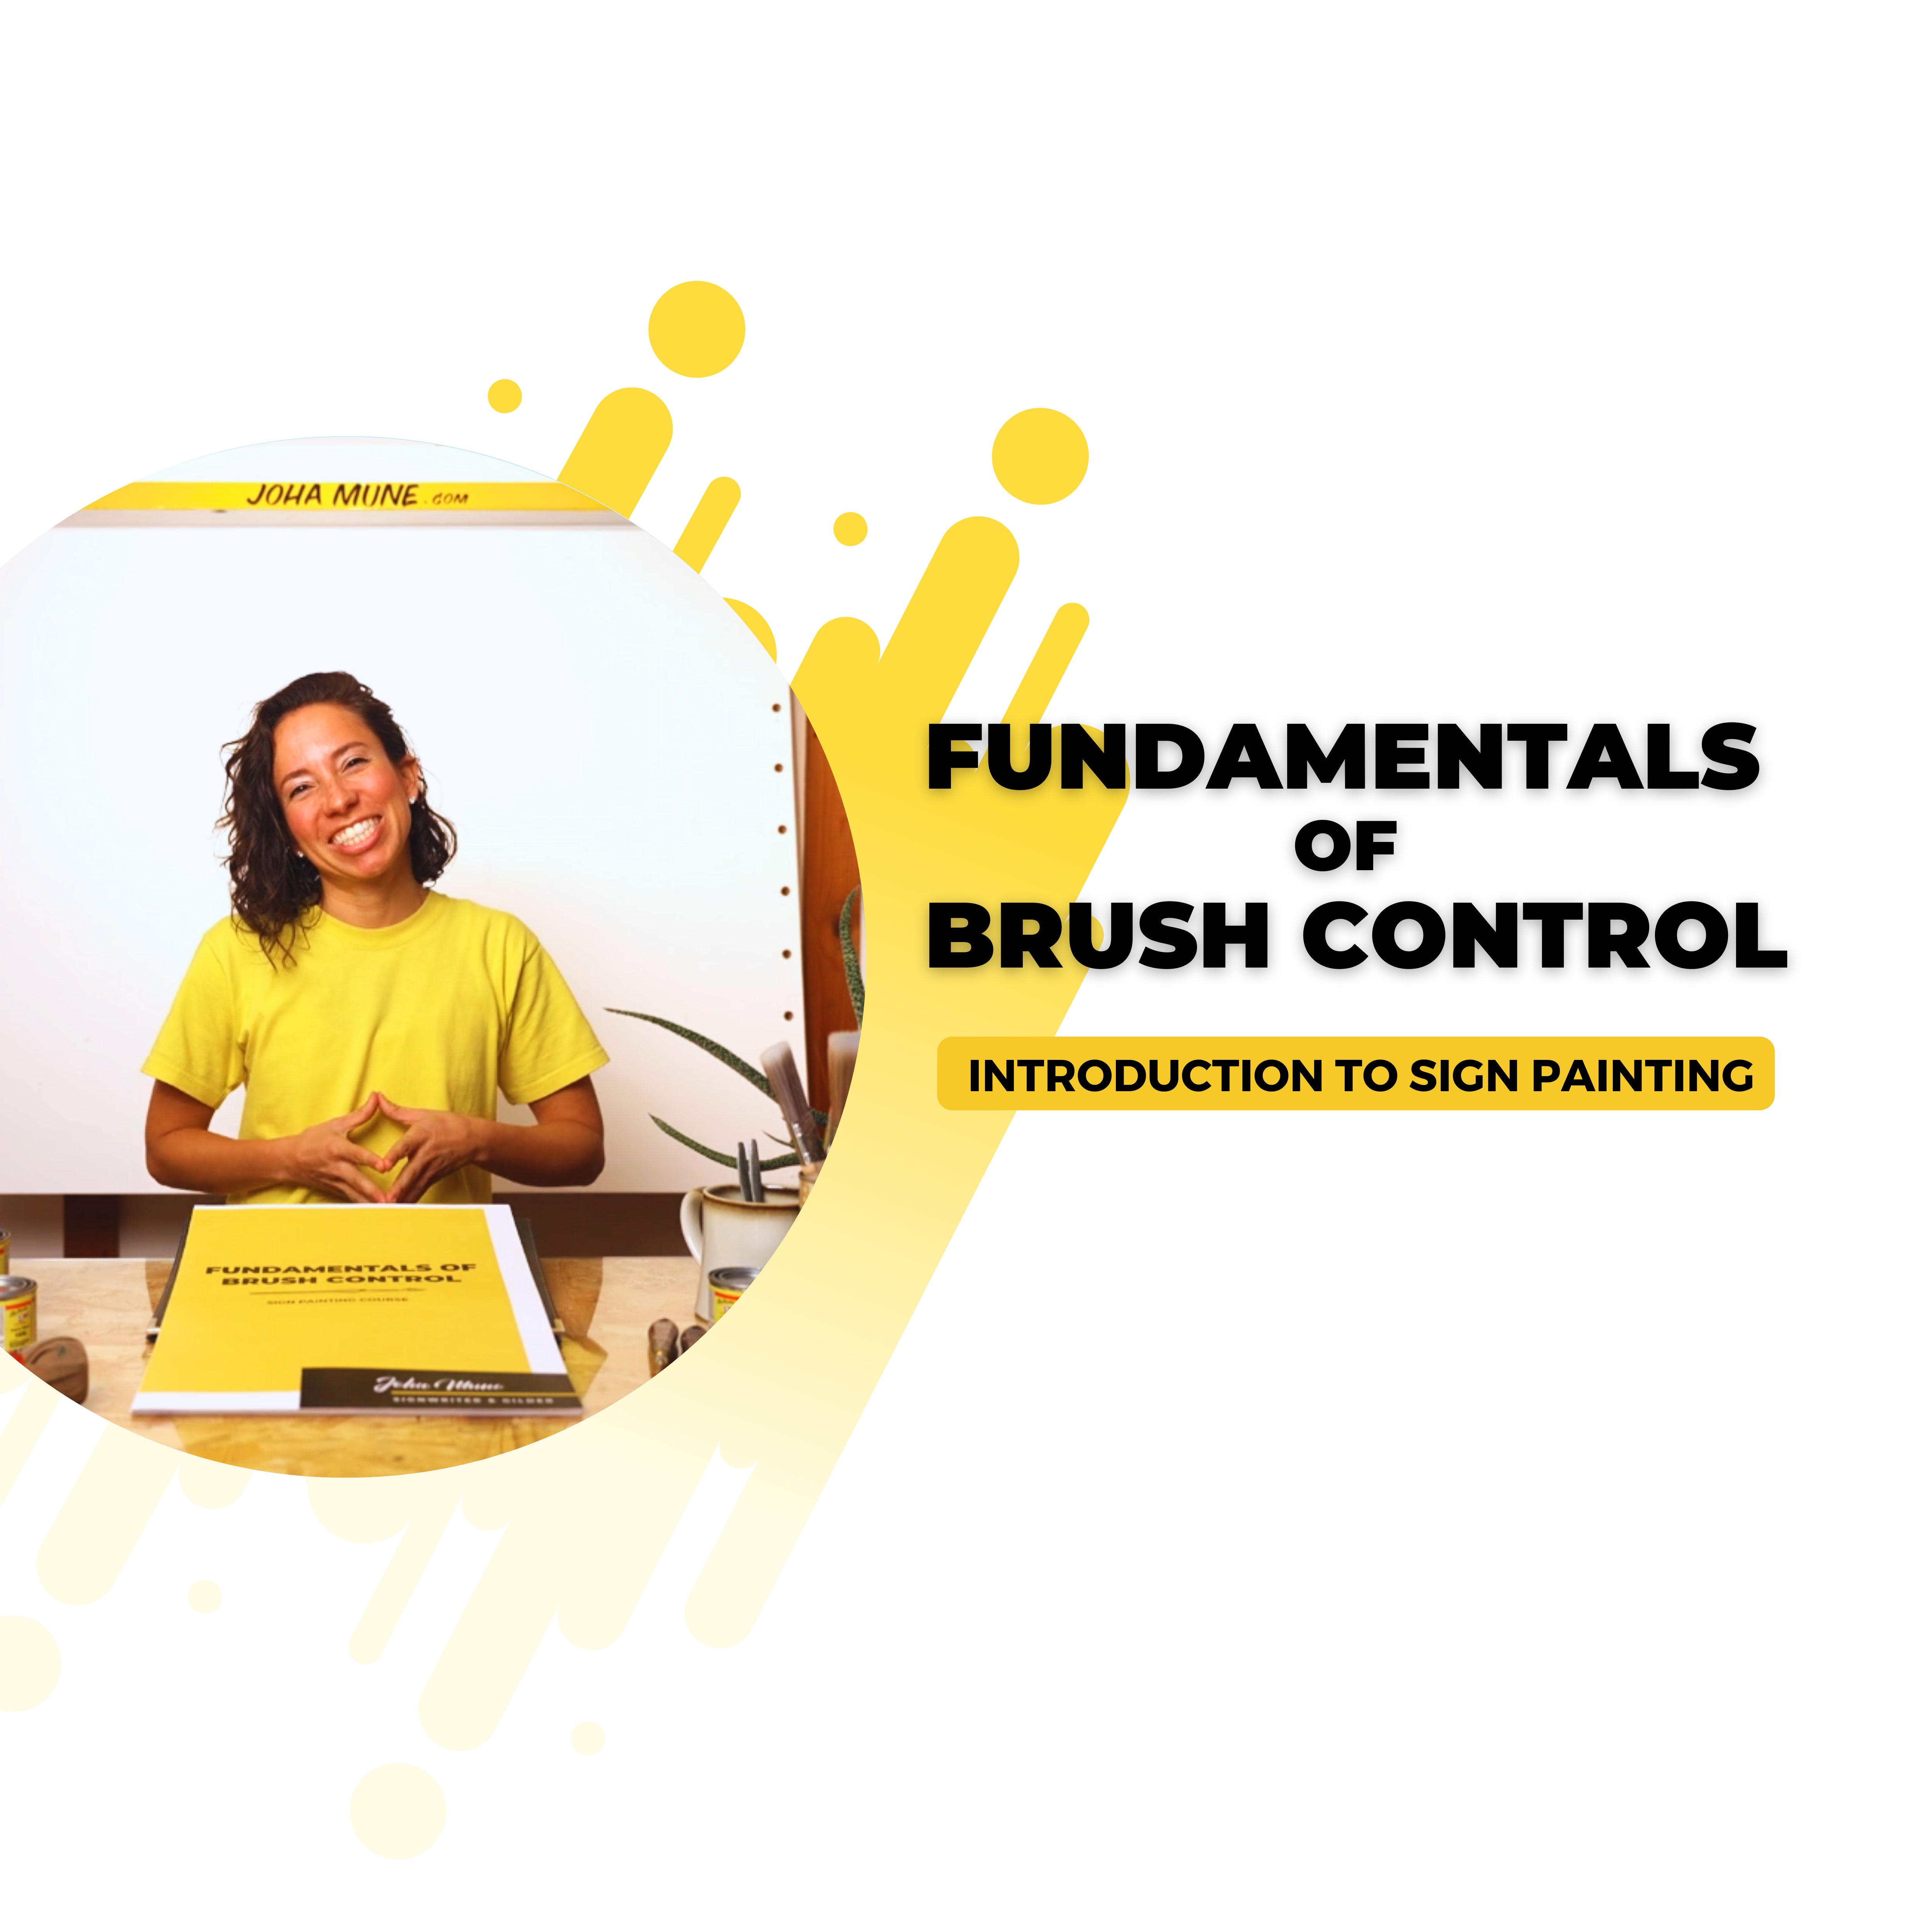 Fundamentals of Brush Control – An Introduction to Sign Painting